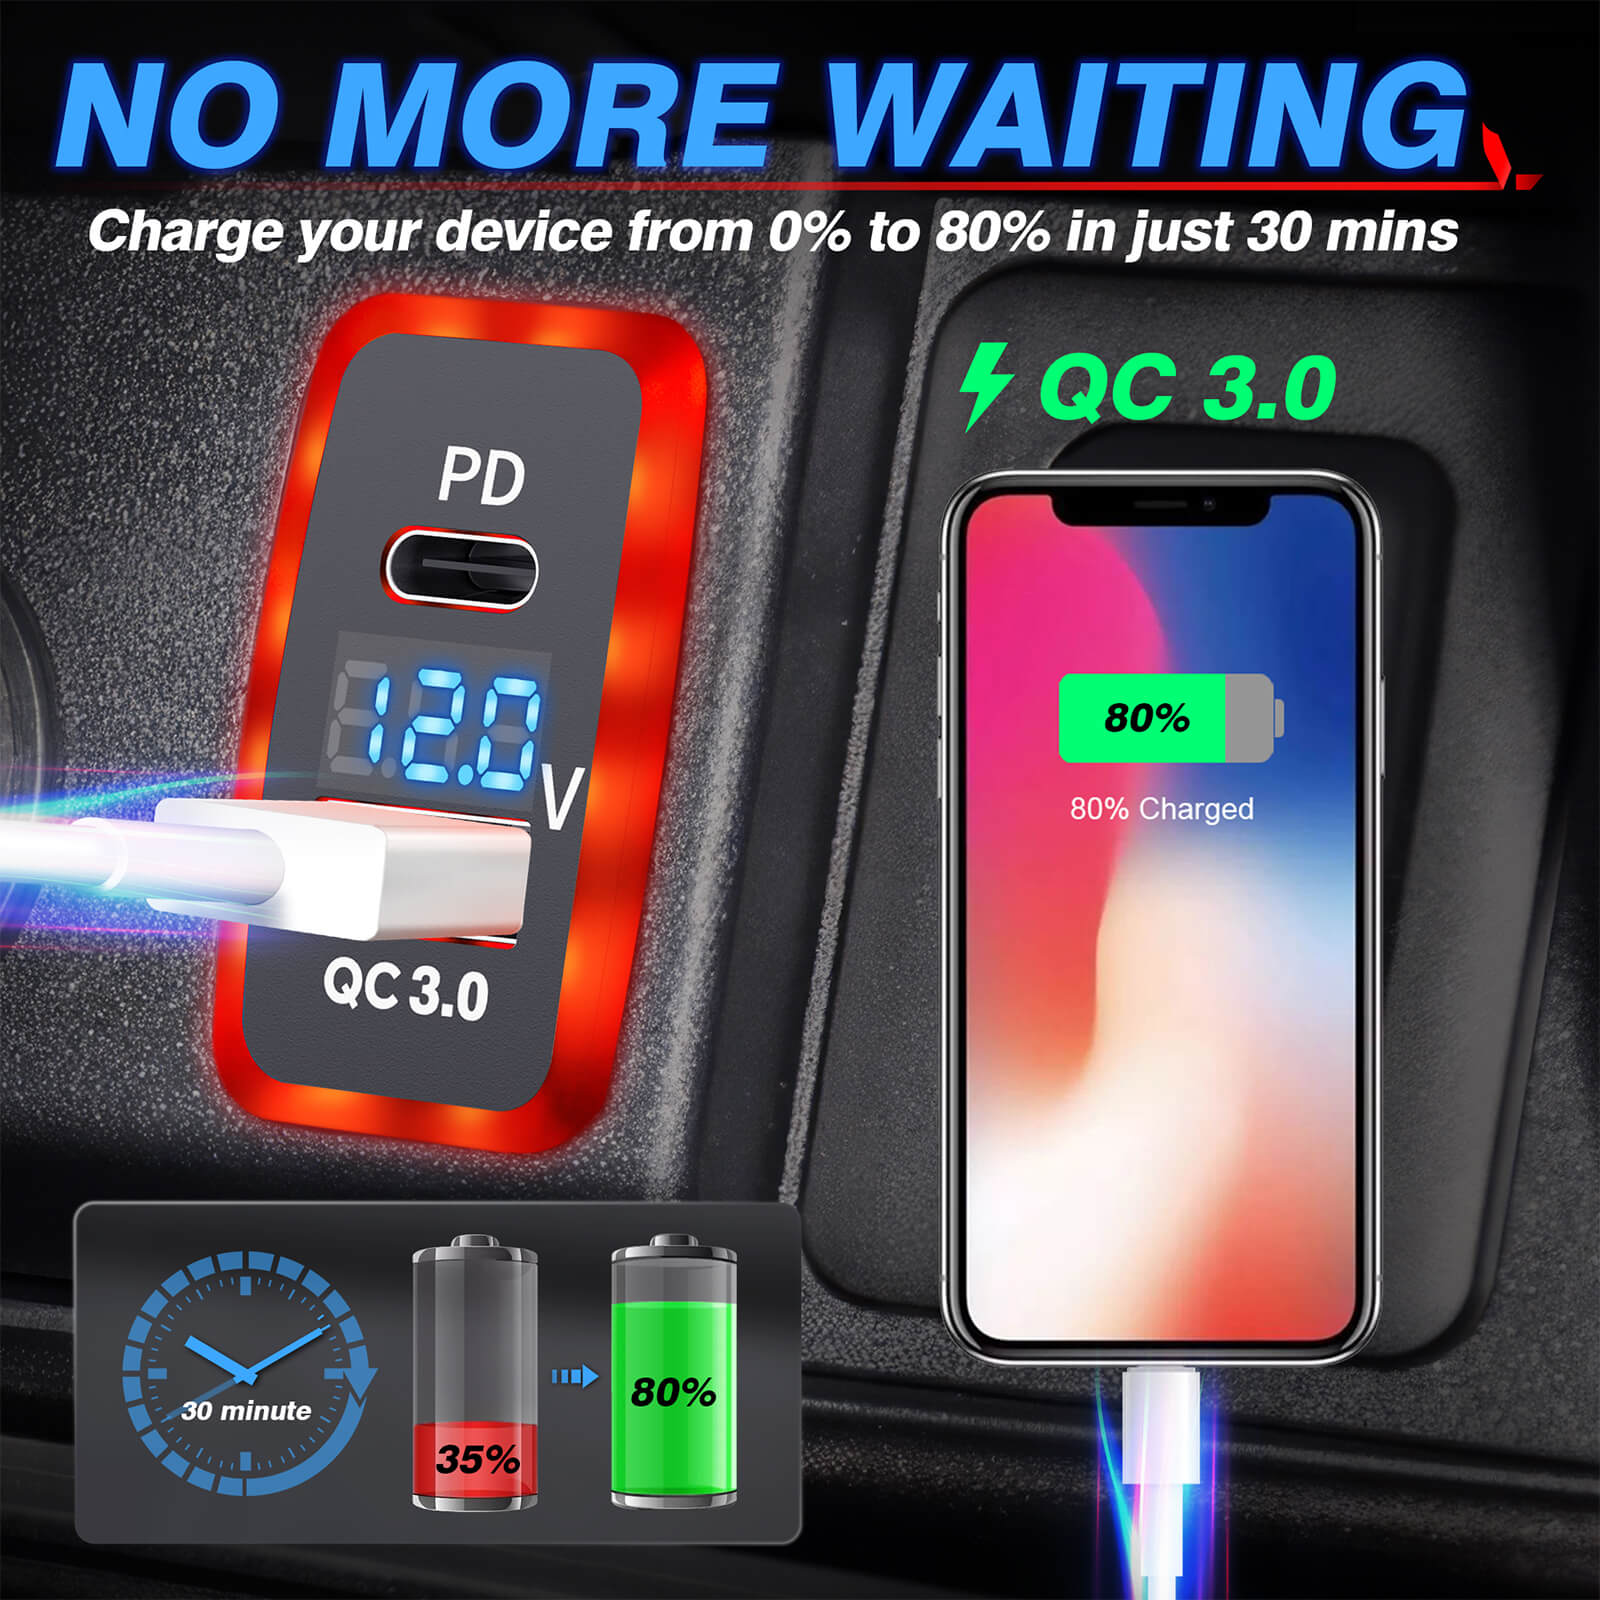 MICTUNING PD+QC3.0 Dual USB Power Socket 3.2A 20W for Toyota, Quick Charge Car Cigarette Lighter Charger with LED Voltage Display